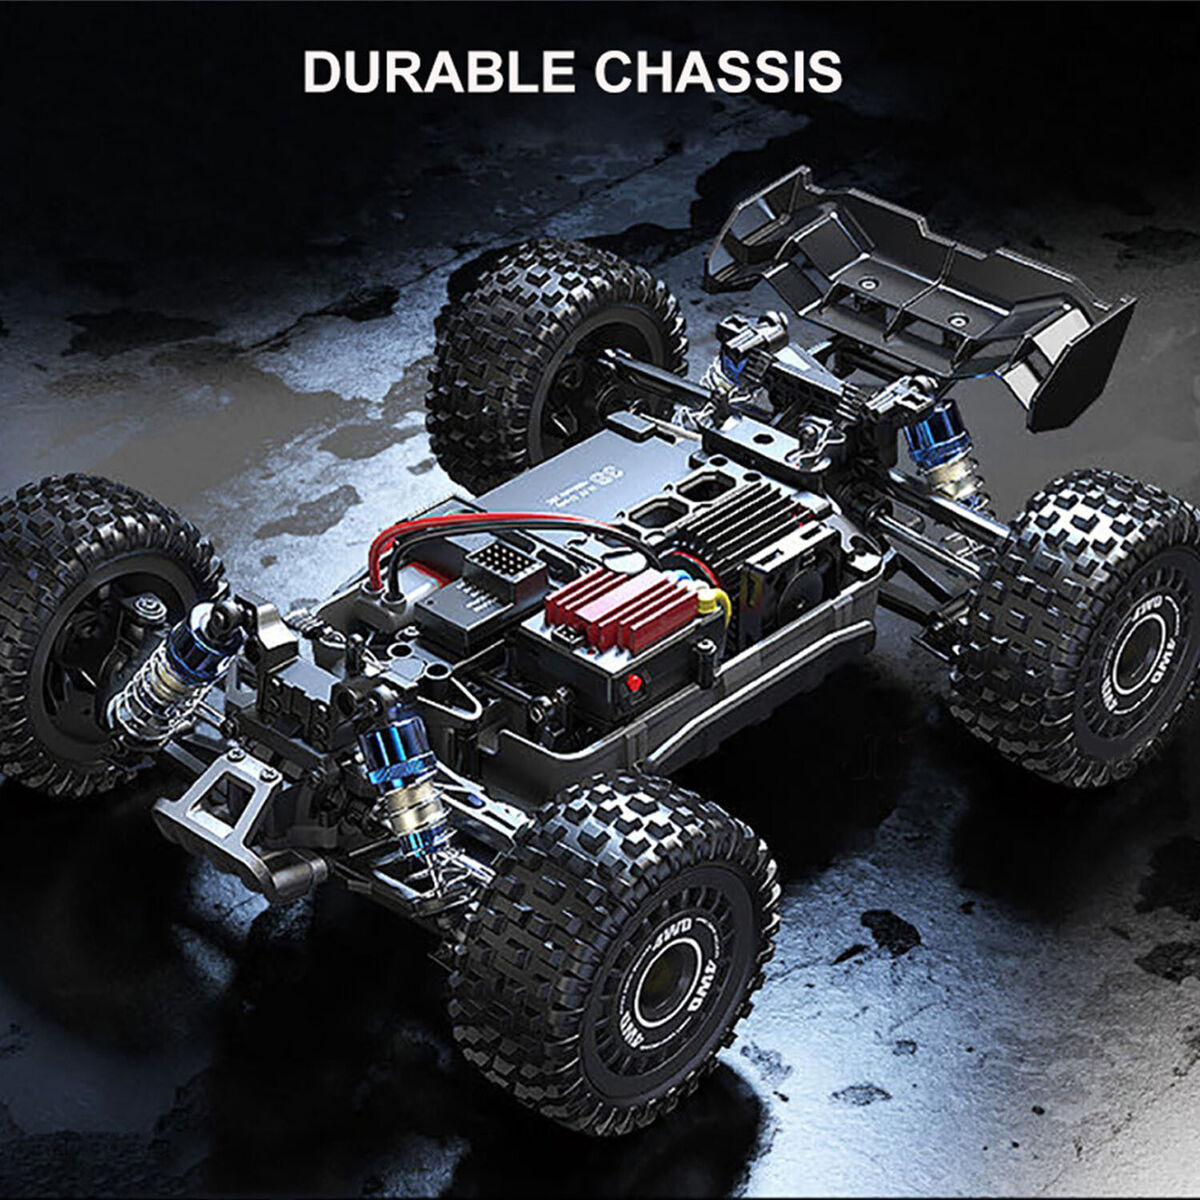 Rugged off-road RC buggy with powerful brushless motor and durable chassis design for extreme terrain exploration.